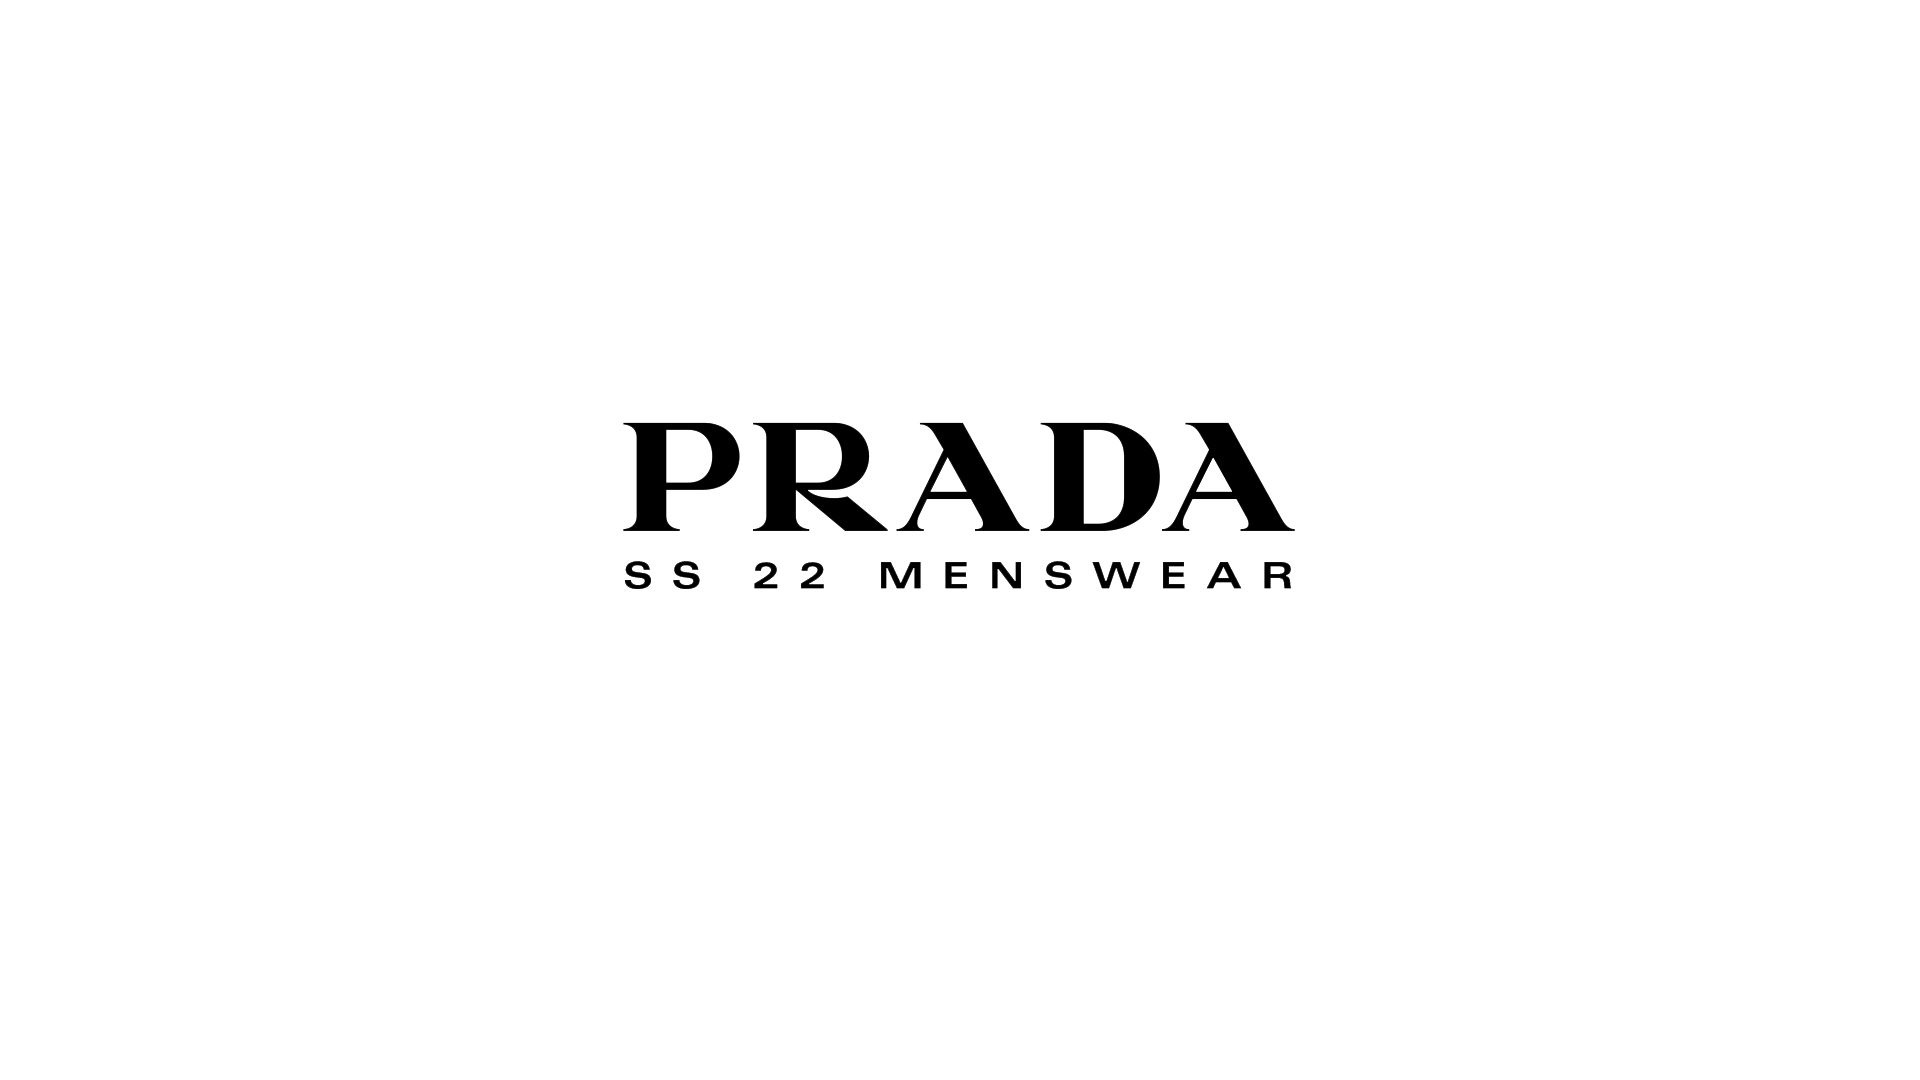 Prada: An Italian leather goods brand, One of the most prestigious brands in the fashion world. 1920x1080 Full HD Wallpaper.